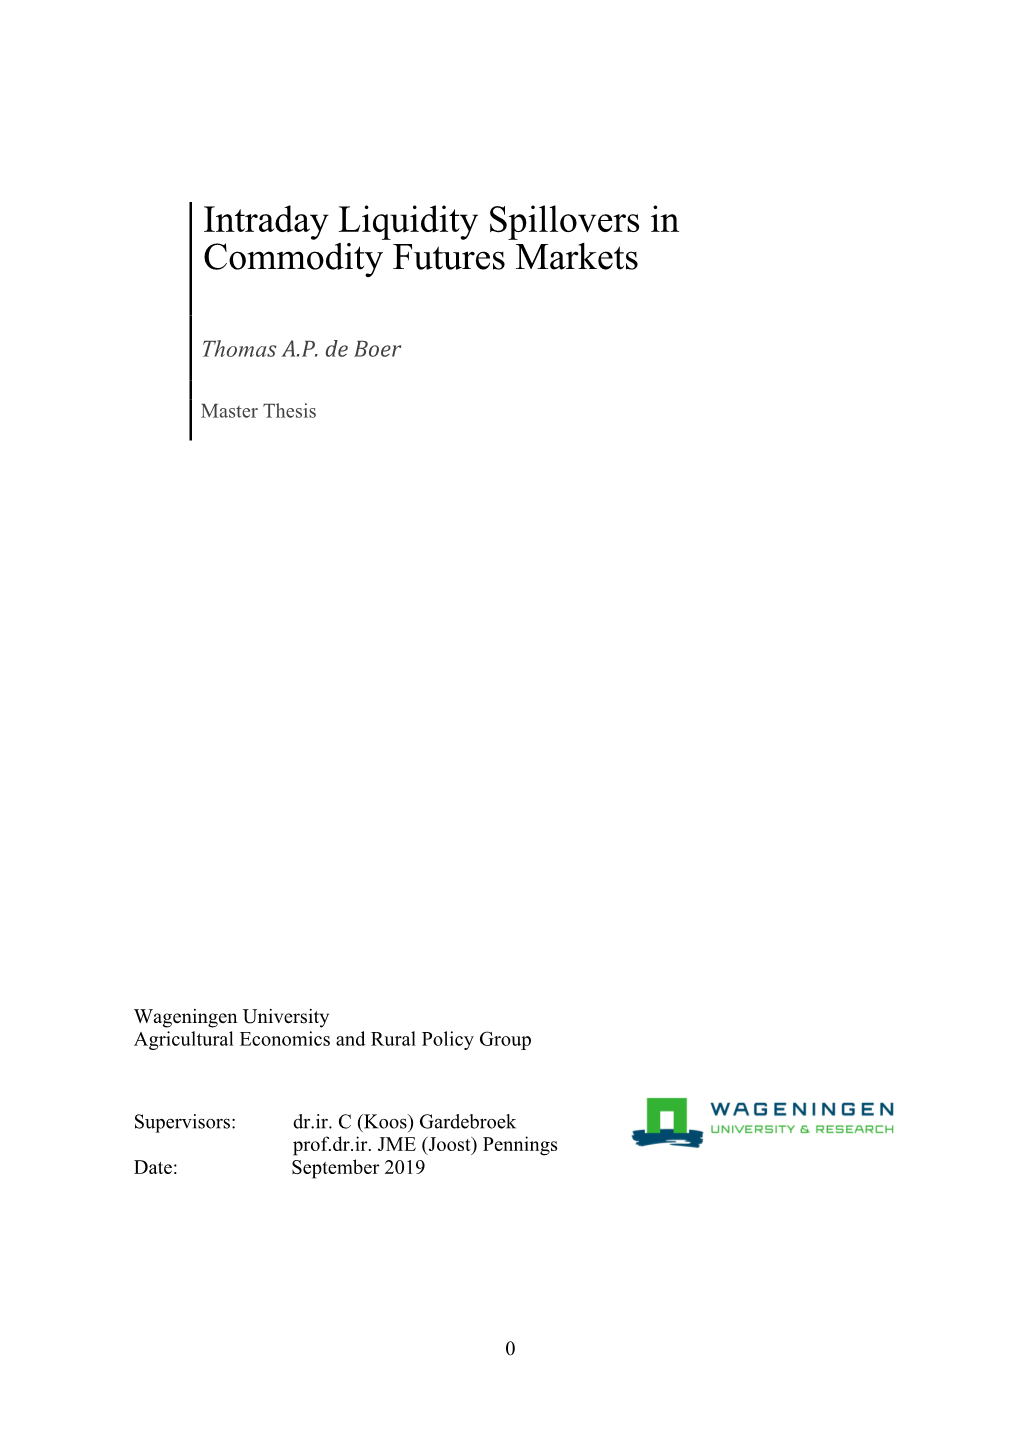 Intraday Liquidity Spillovers in Commodity Futures Markets